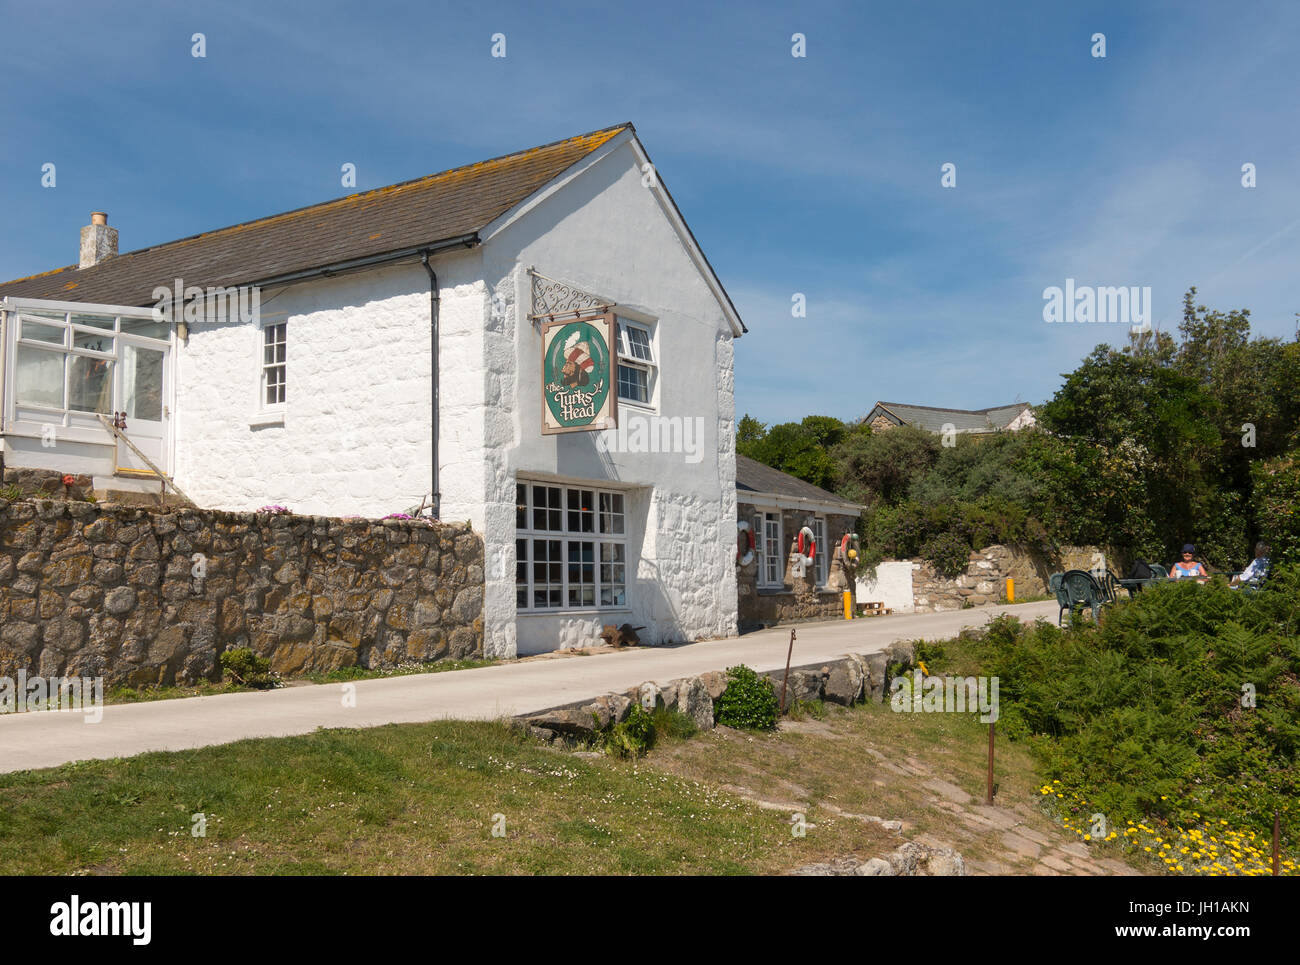 The Turks Head pub in St Agnes, Isles of Scilly, Cornwall England UK.  The only pub on the island. Stock Photo